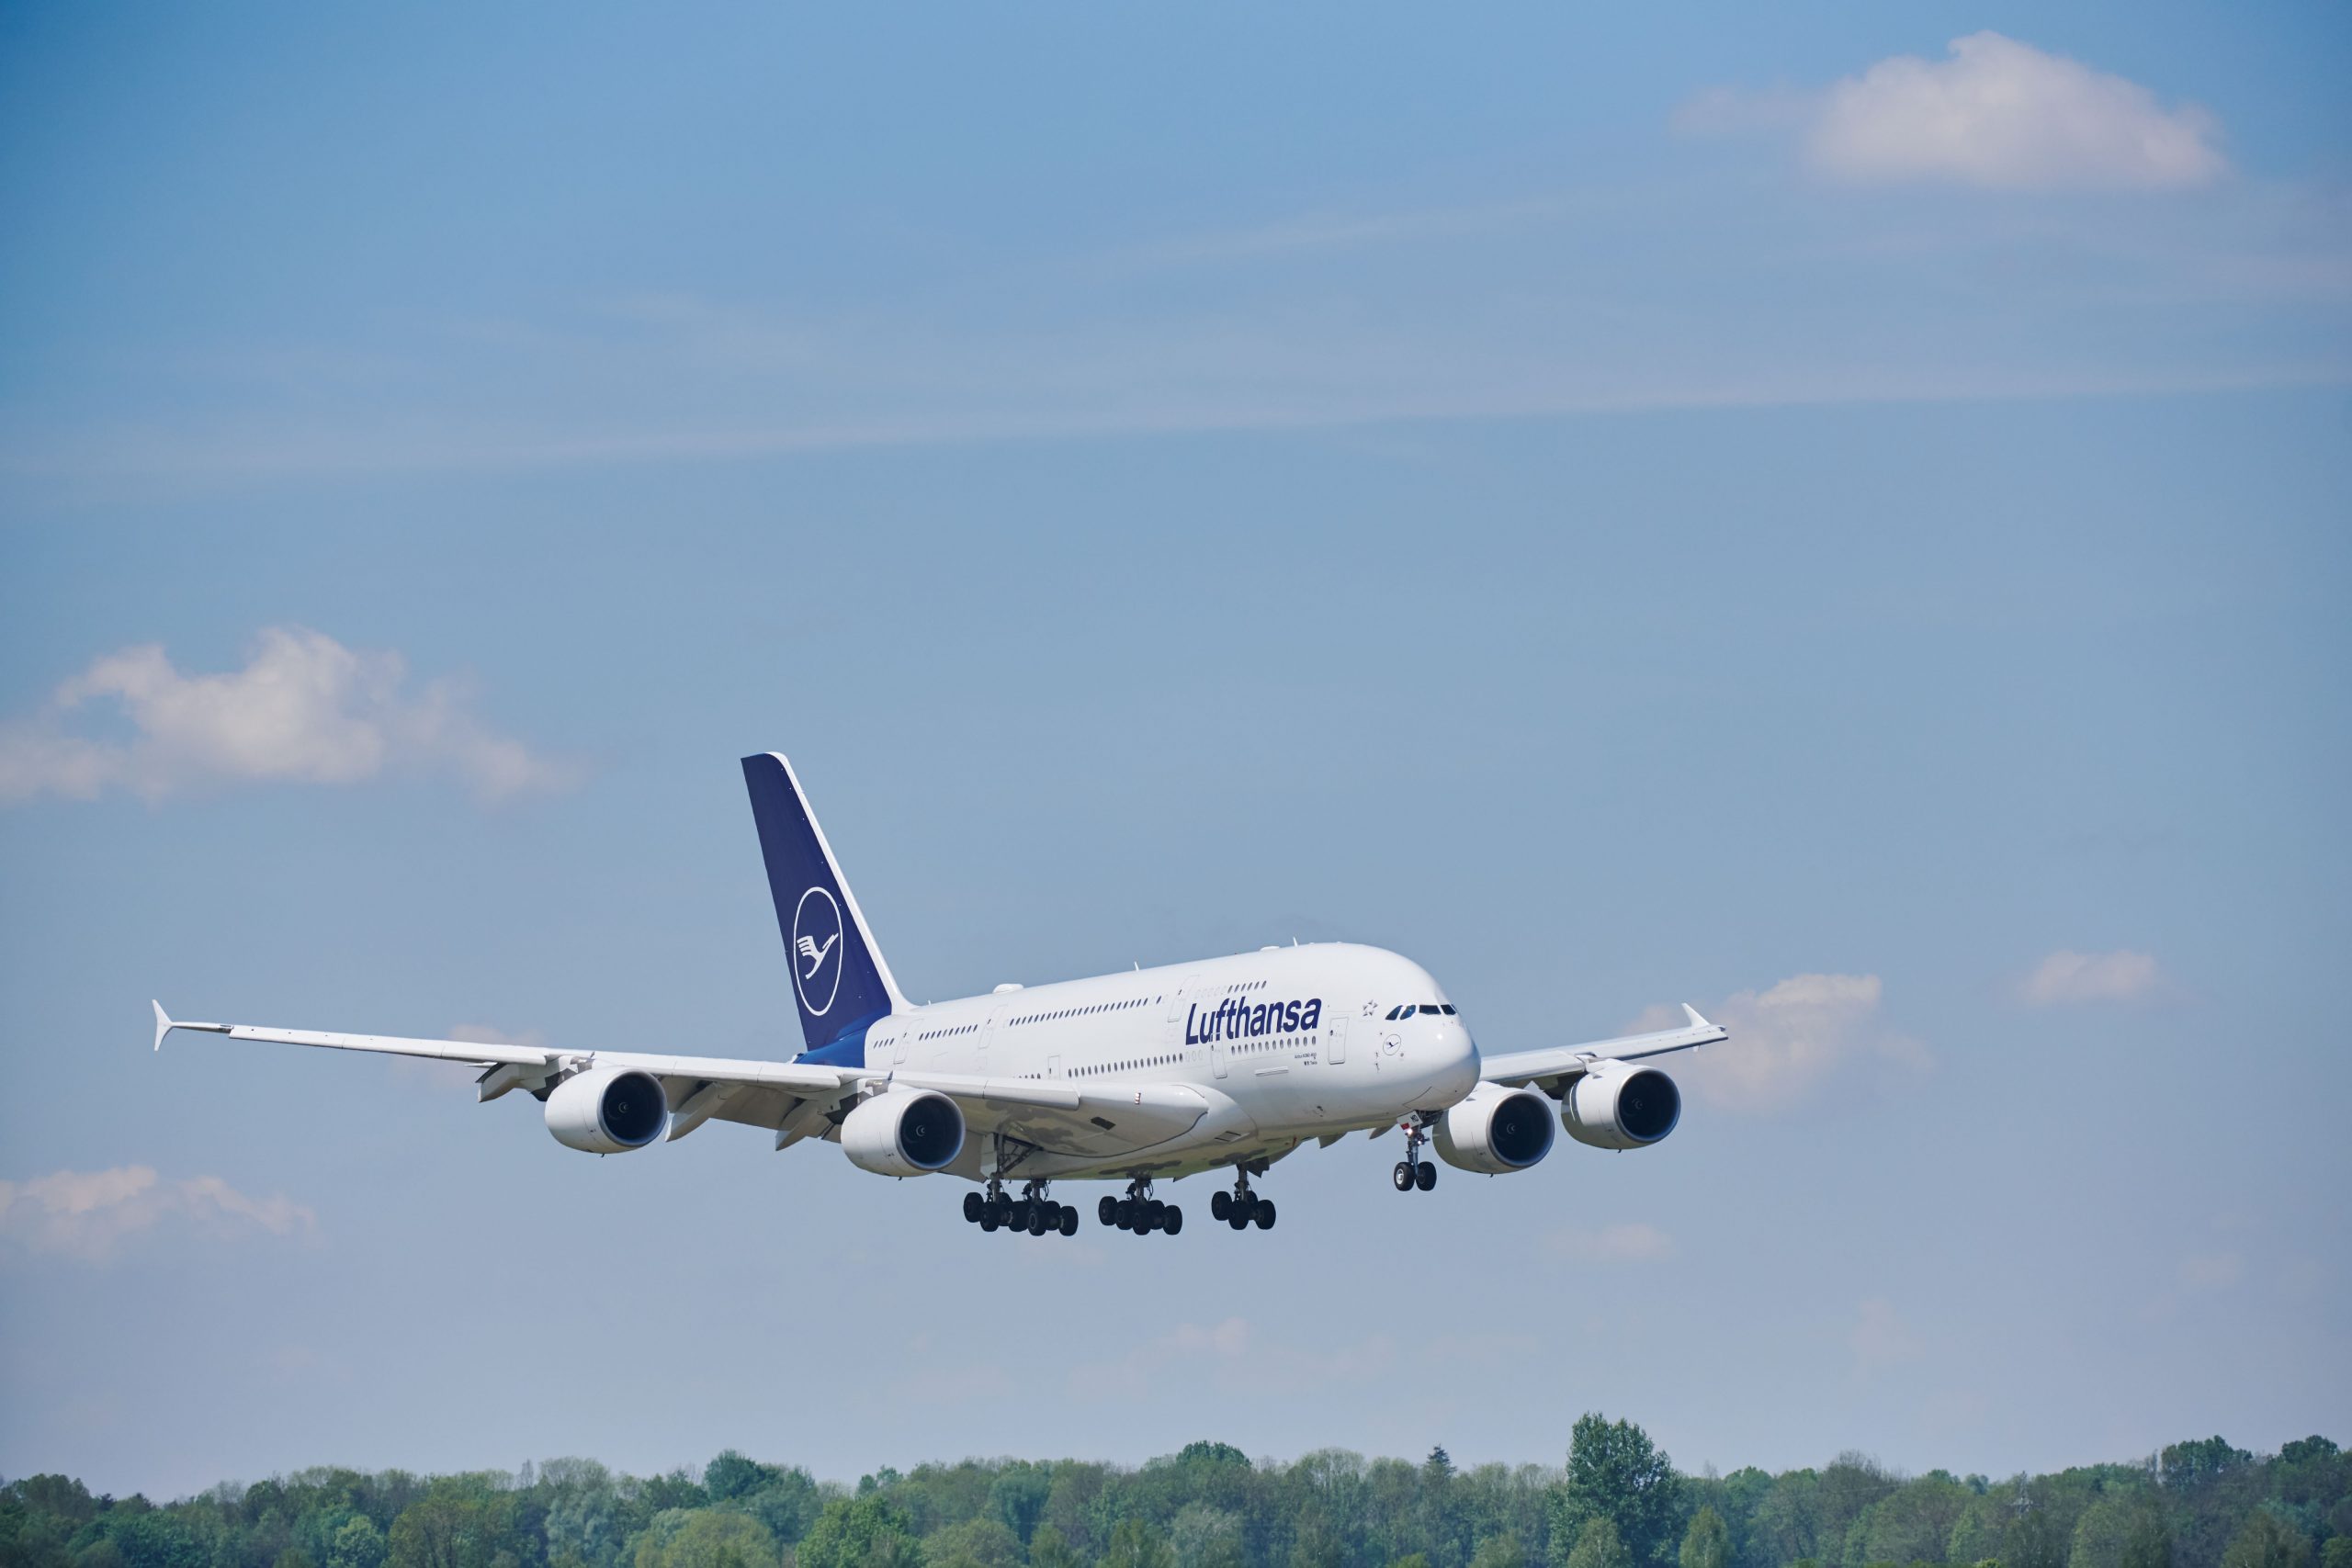 Lufthansa finally decided to reactivate the Airbus A380 - AIRLIVE